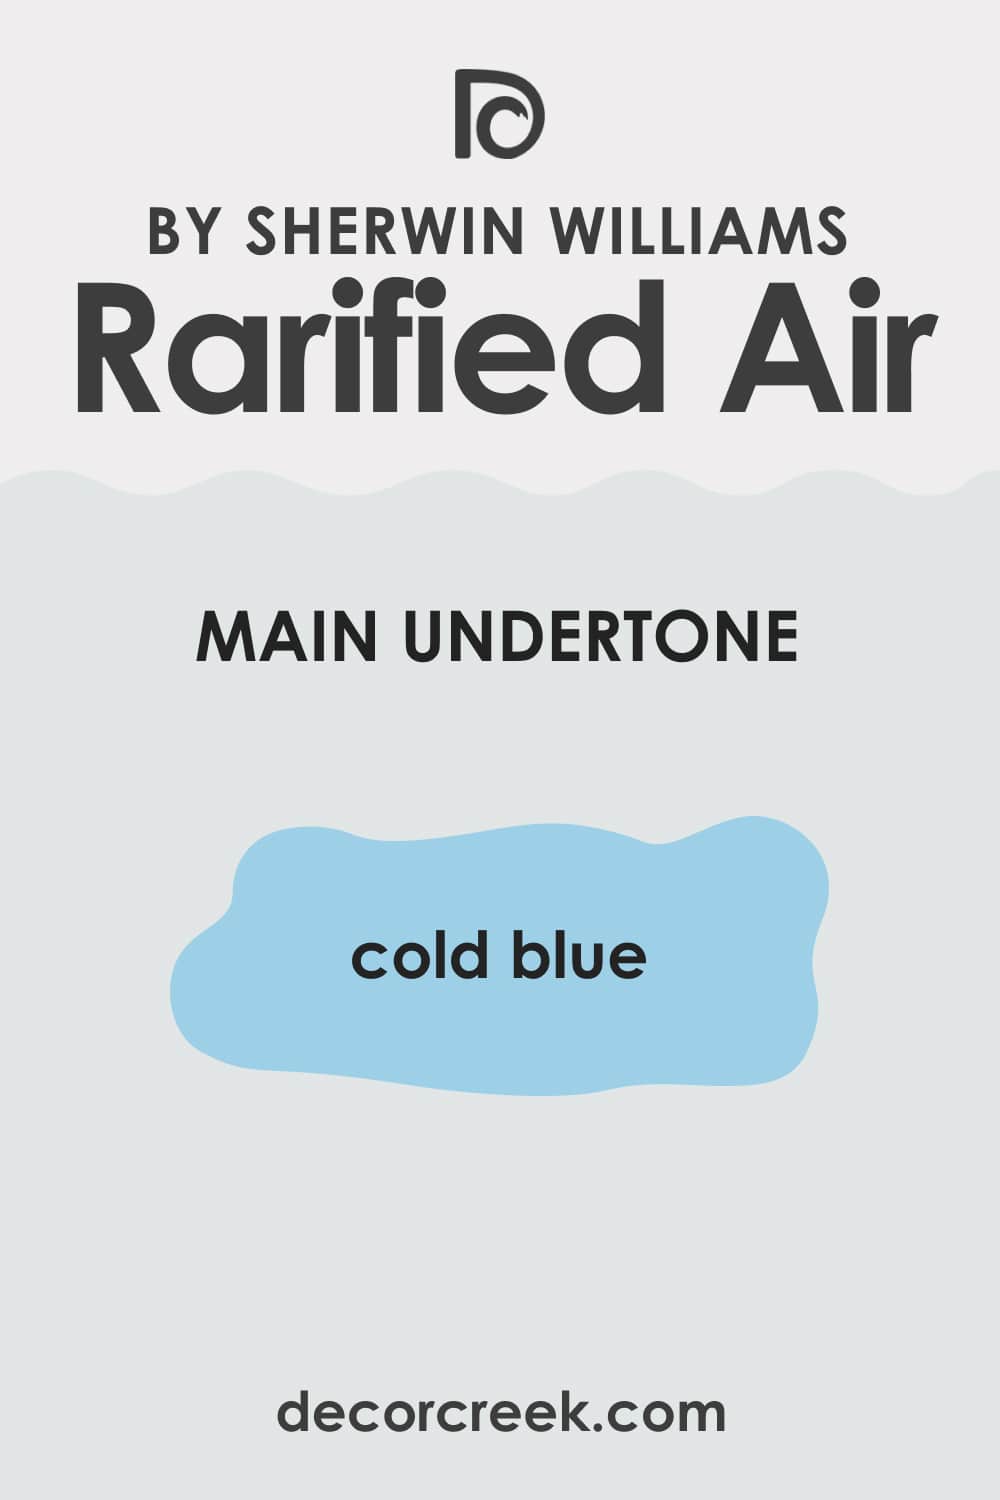 What Undertones Does Rarified Air SW-6525 Have?